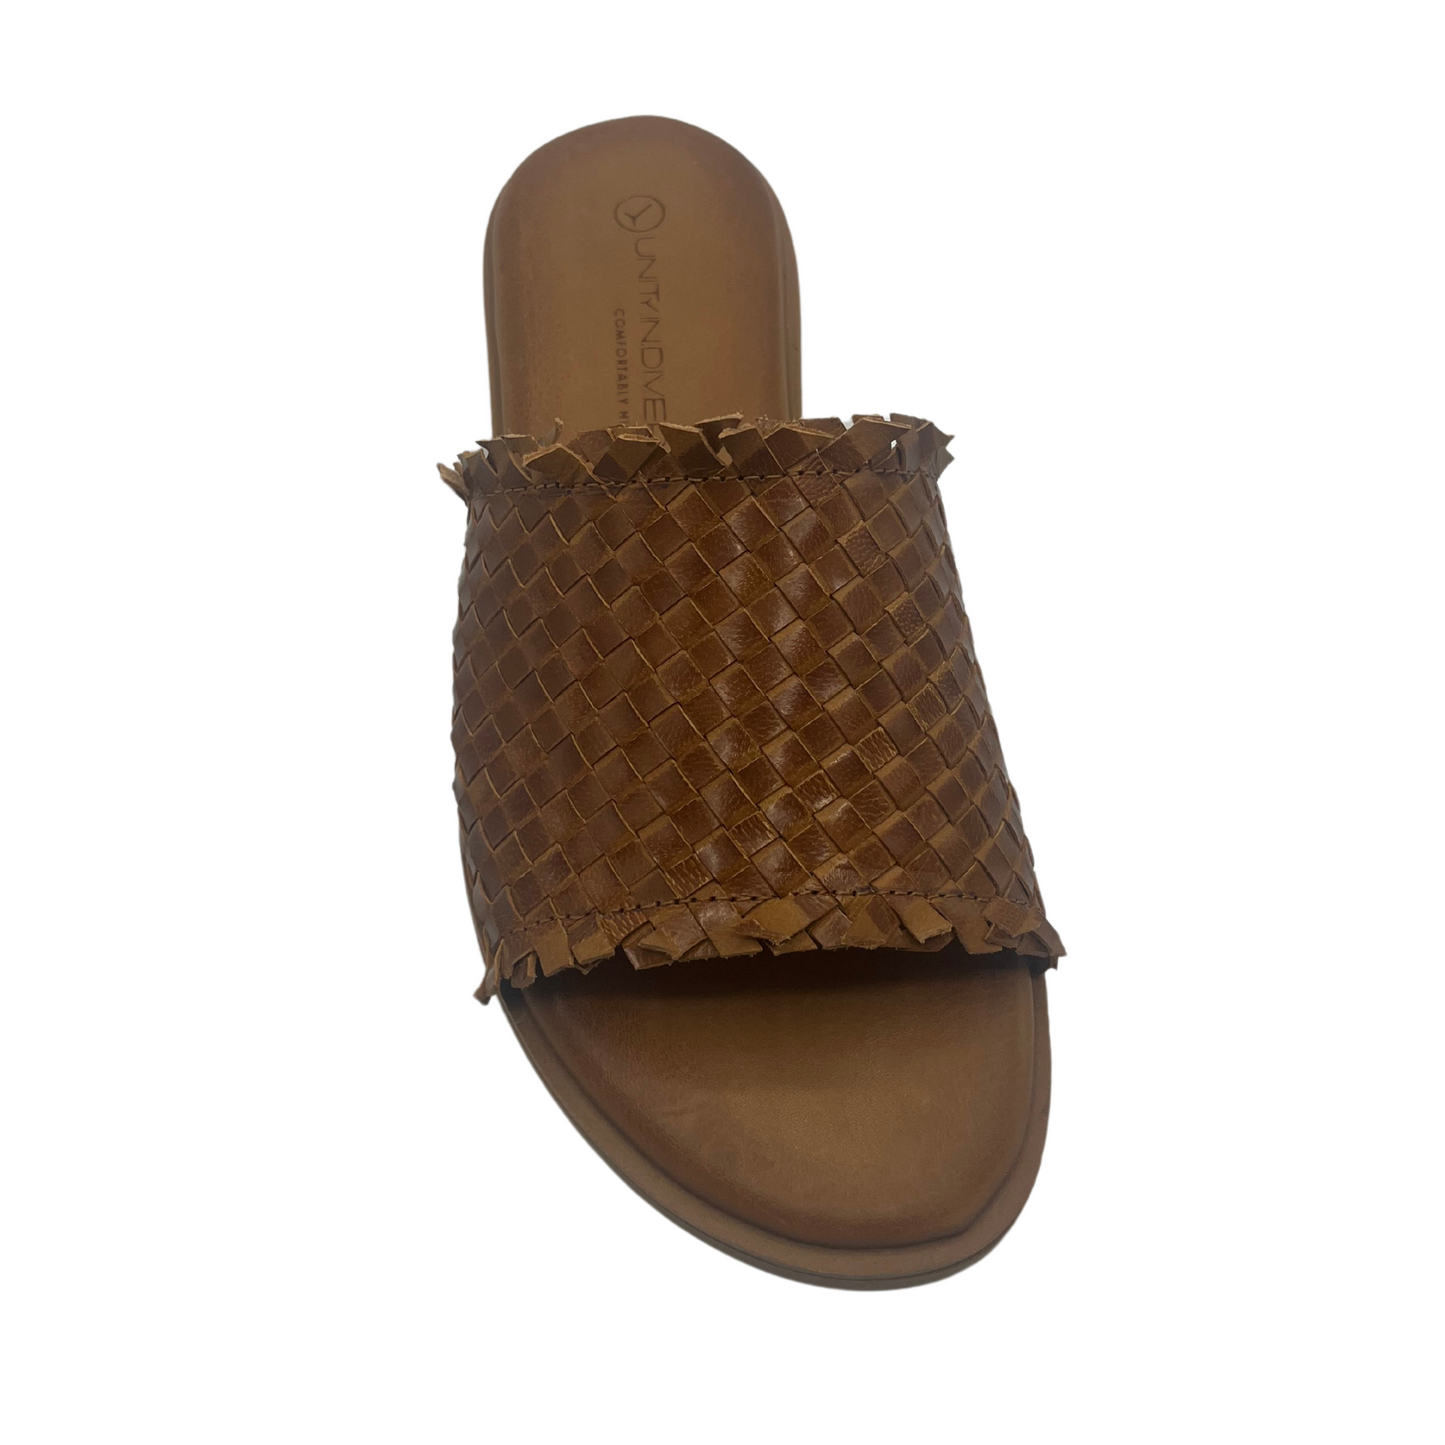 Top view of brown woven leather slip on sandal with open toe and leather lined footbed